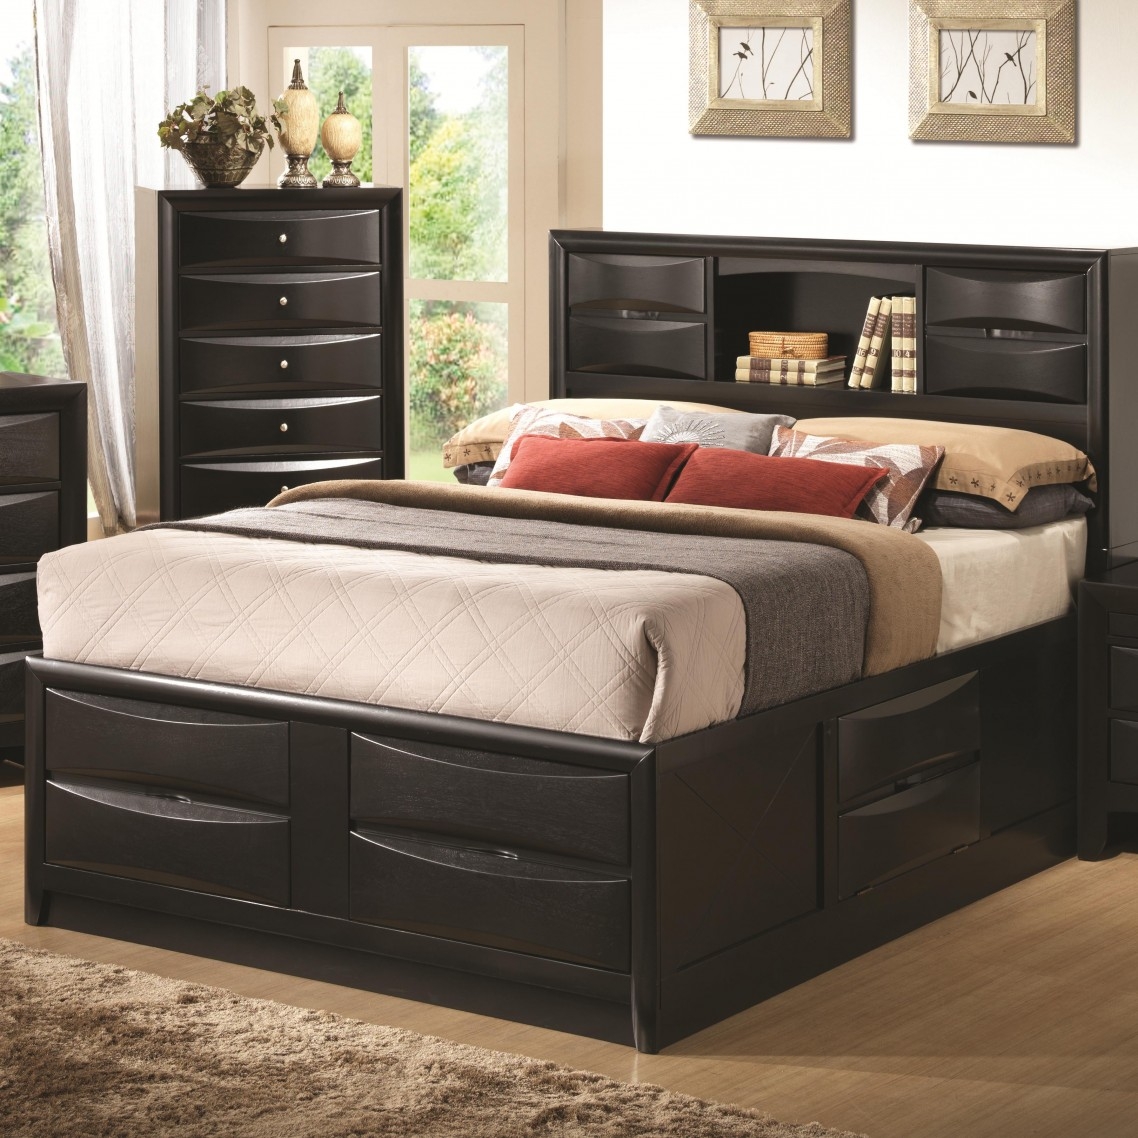 queen size bed frame with storage QXPCHLZ